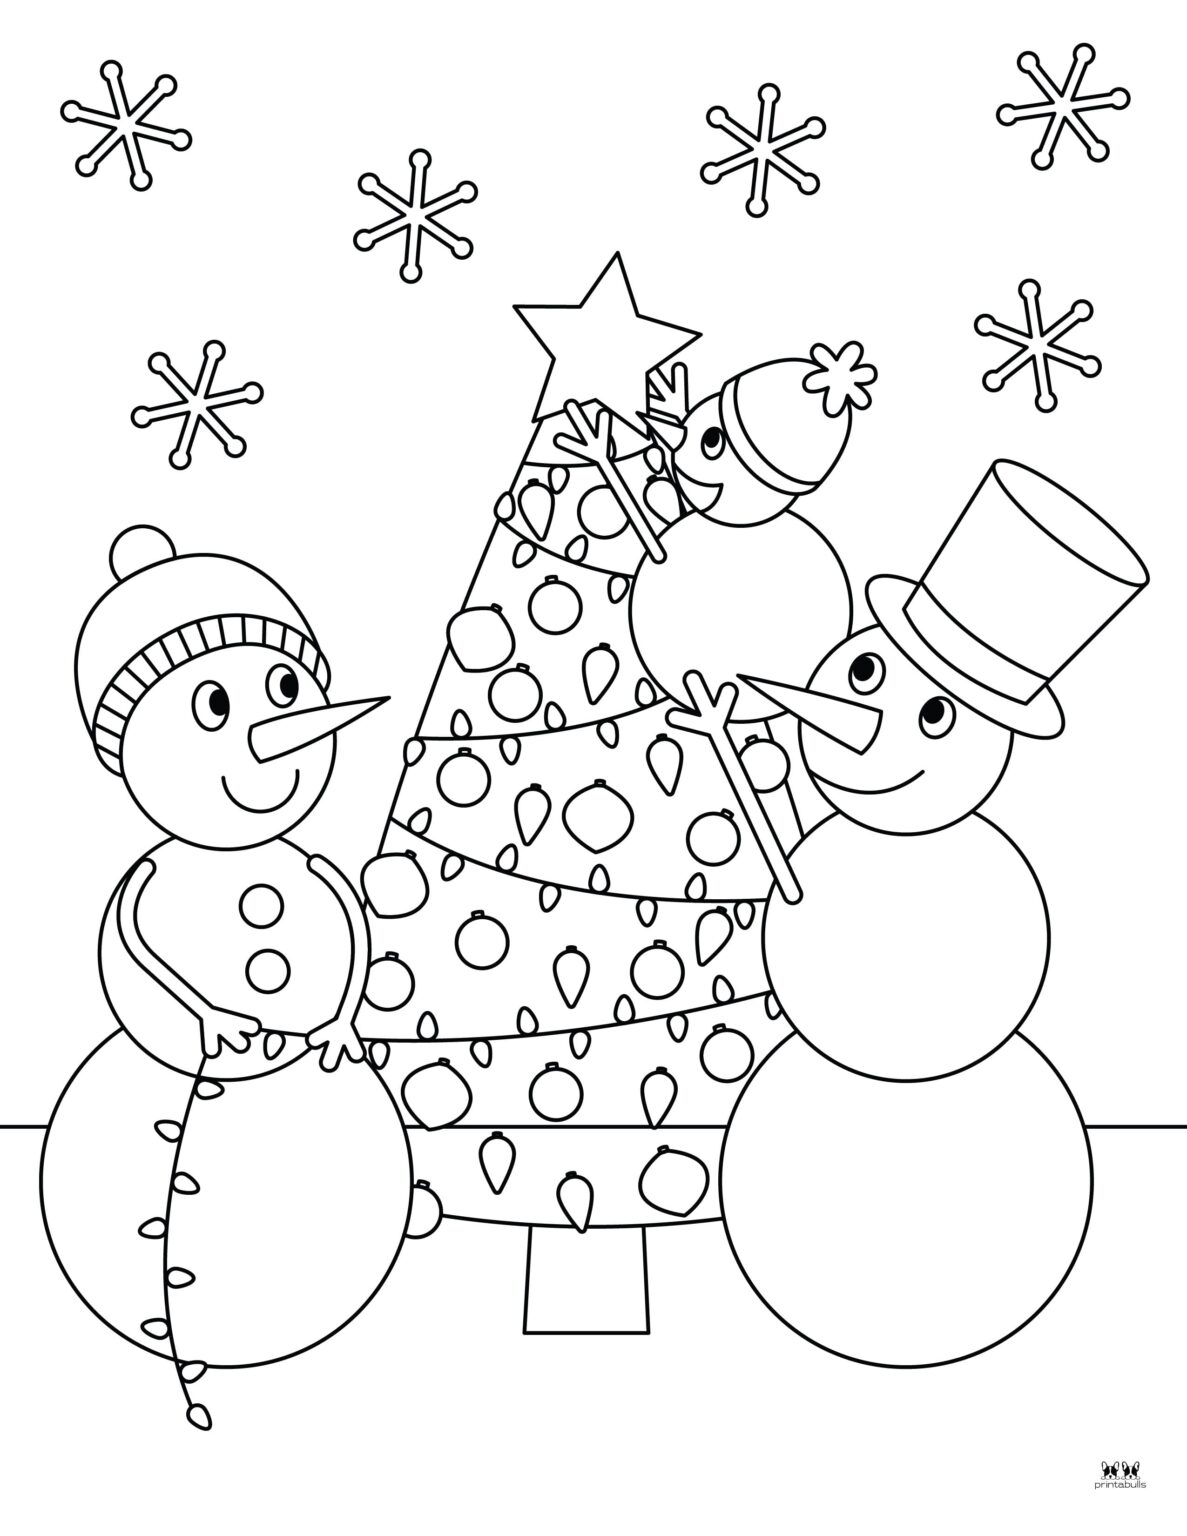 Snowman Coloring Pages & Templates - 35 Pages | Printabulls